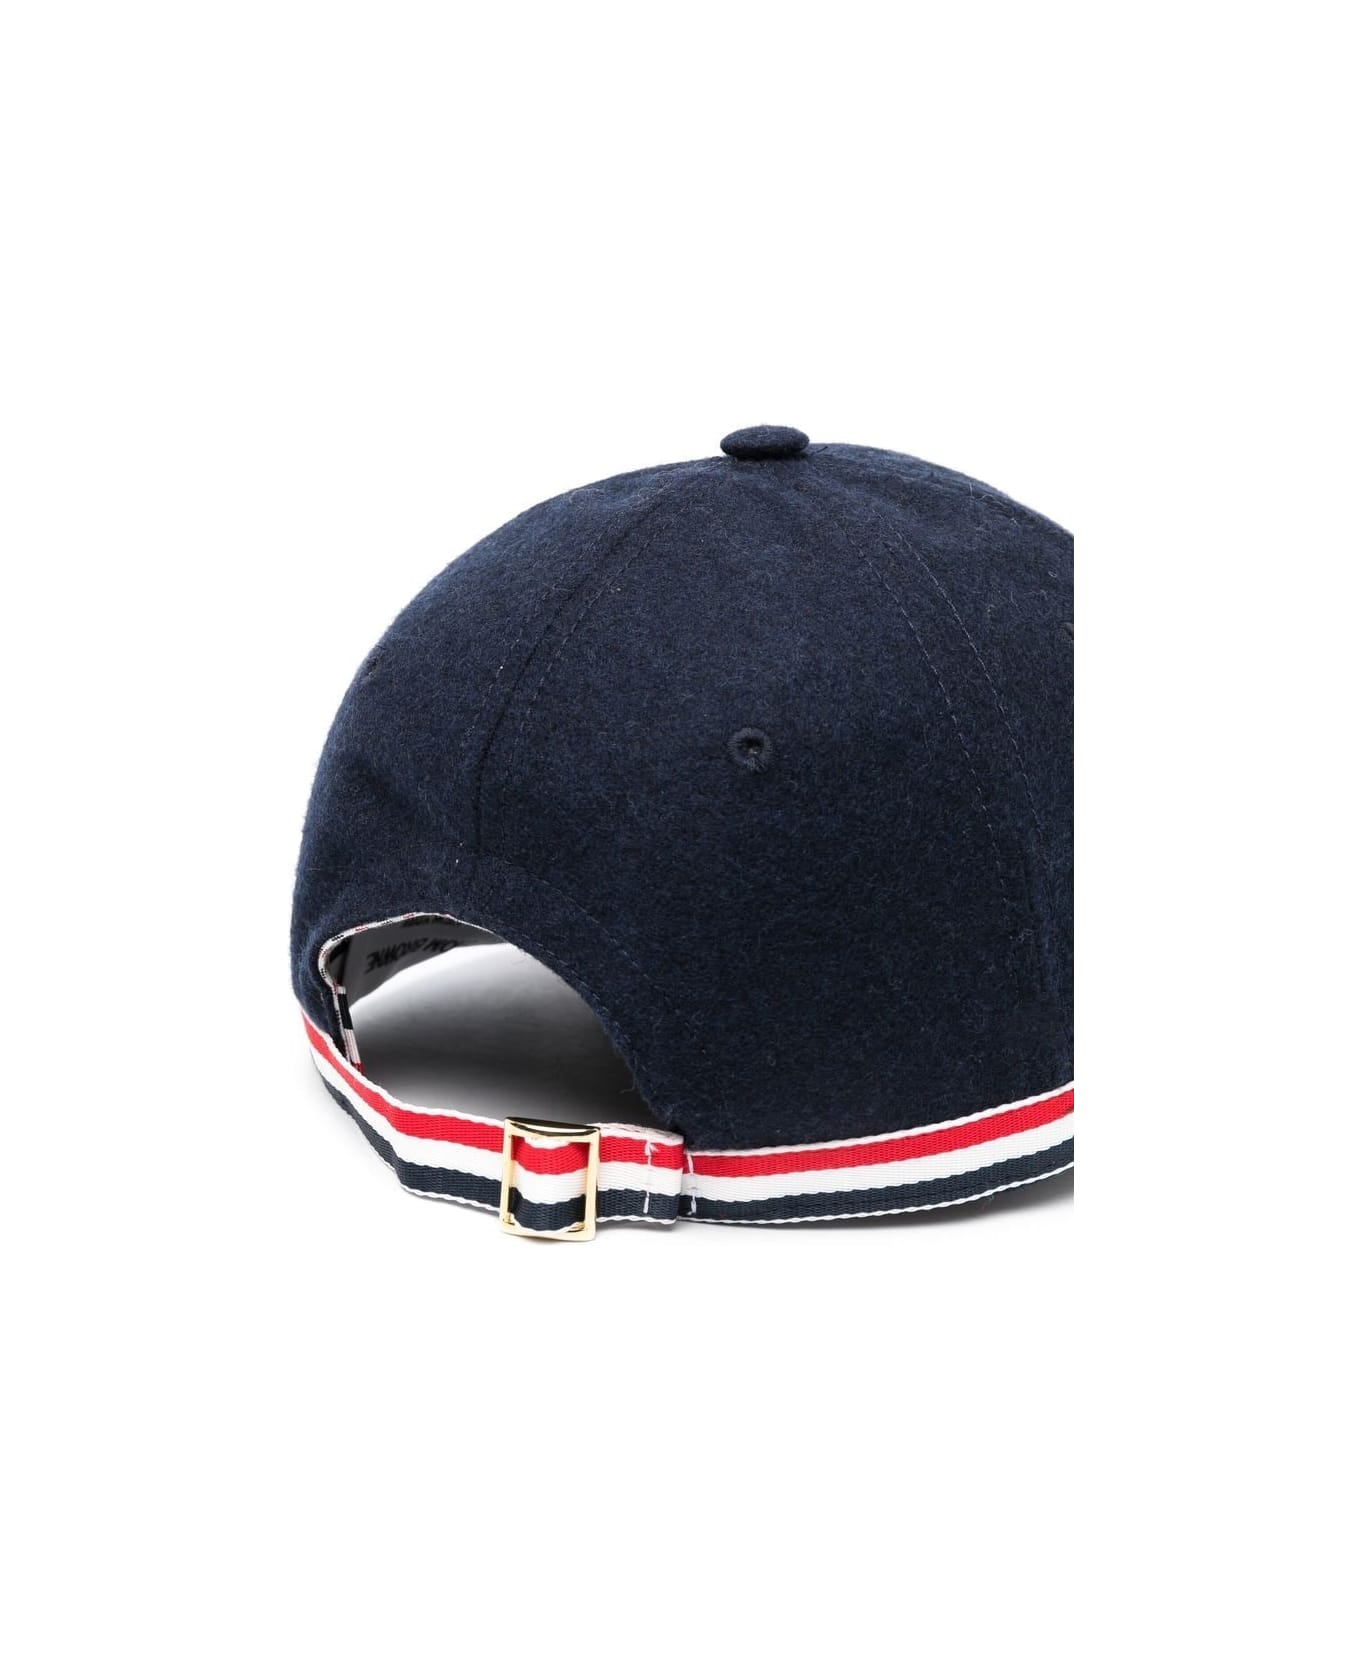 Thom Browne Gg Bow Baseball Cap In Wool Flannel - Navy